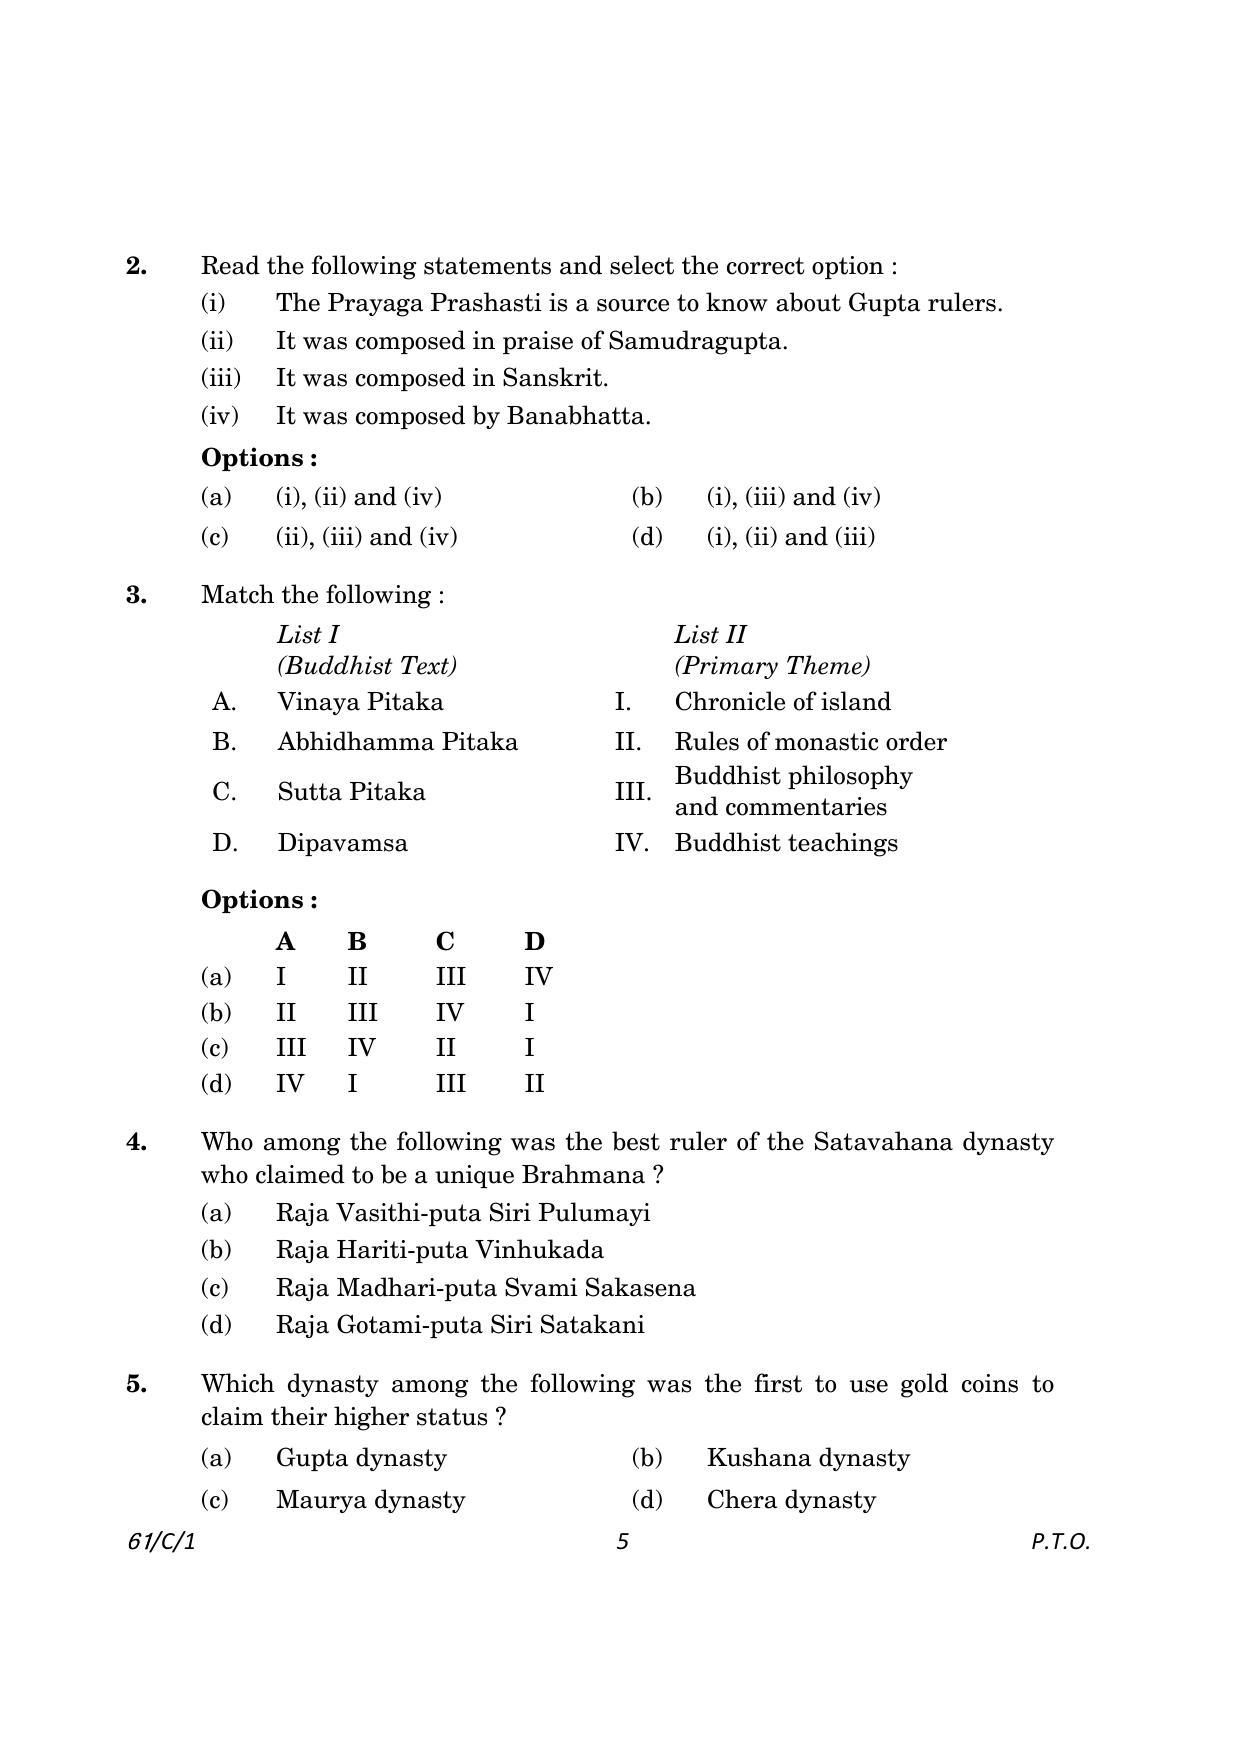 CBSE Class 12 61-1 History 2023 (Compartment) Question Paper - Page 5